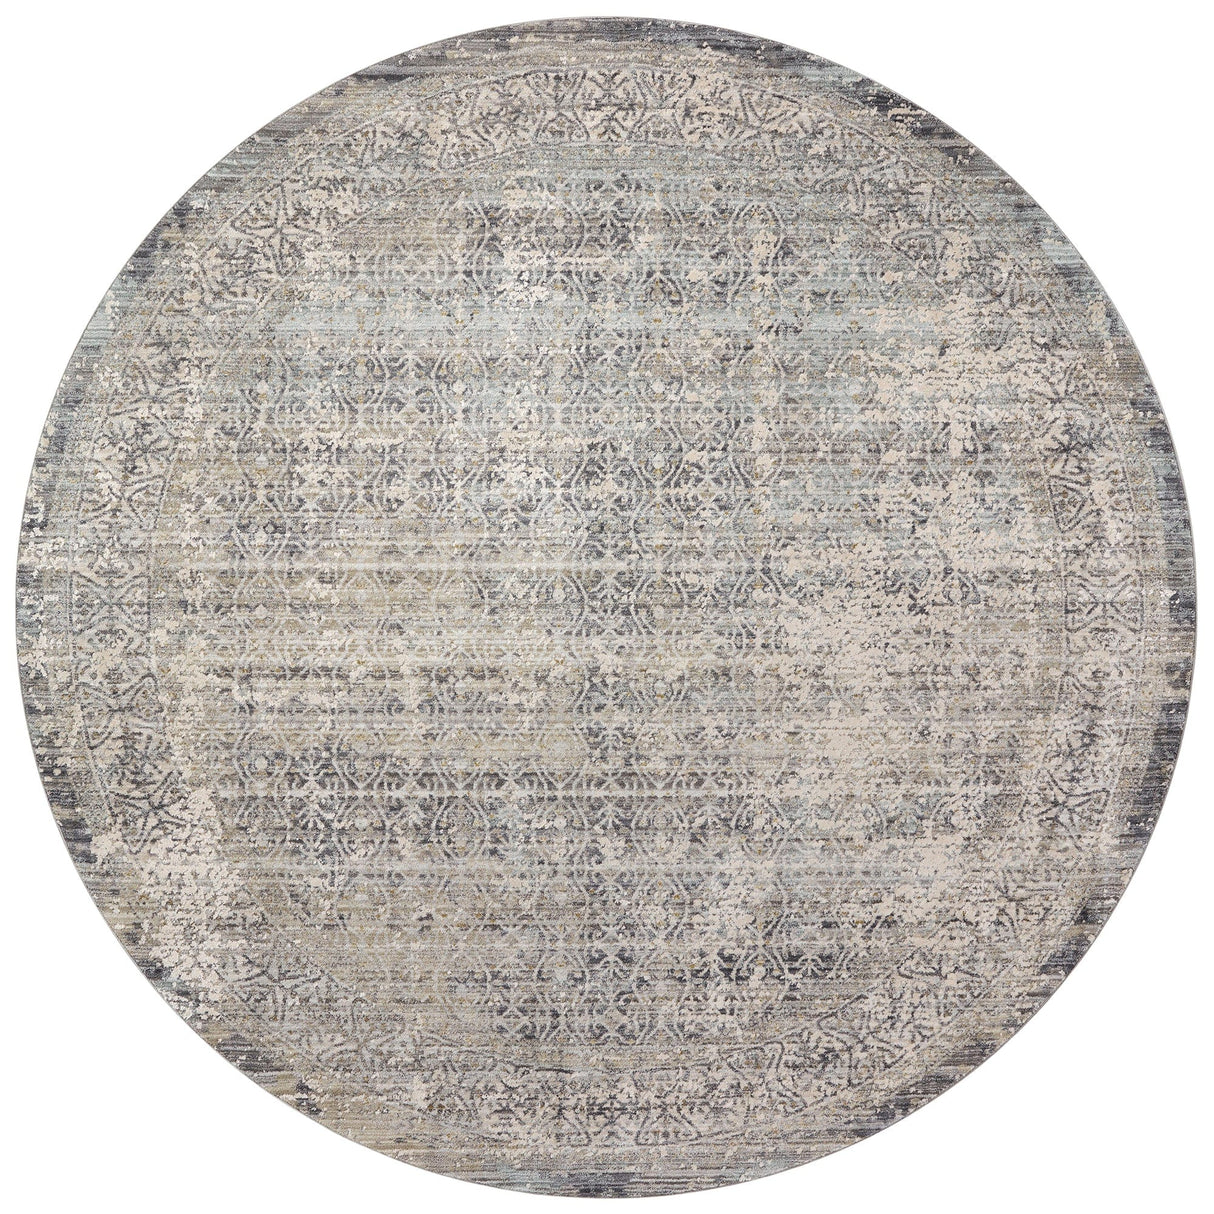 Amber Lewis Alie Round Rug - Sky/Stone Rugs loloi-ALIEALE-04SCSN-53RD